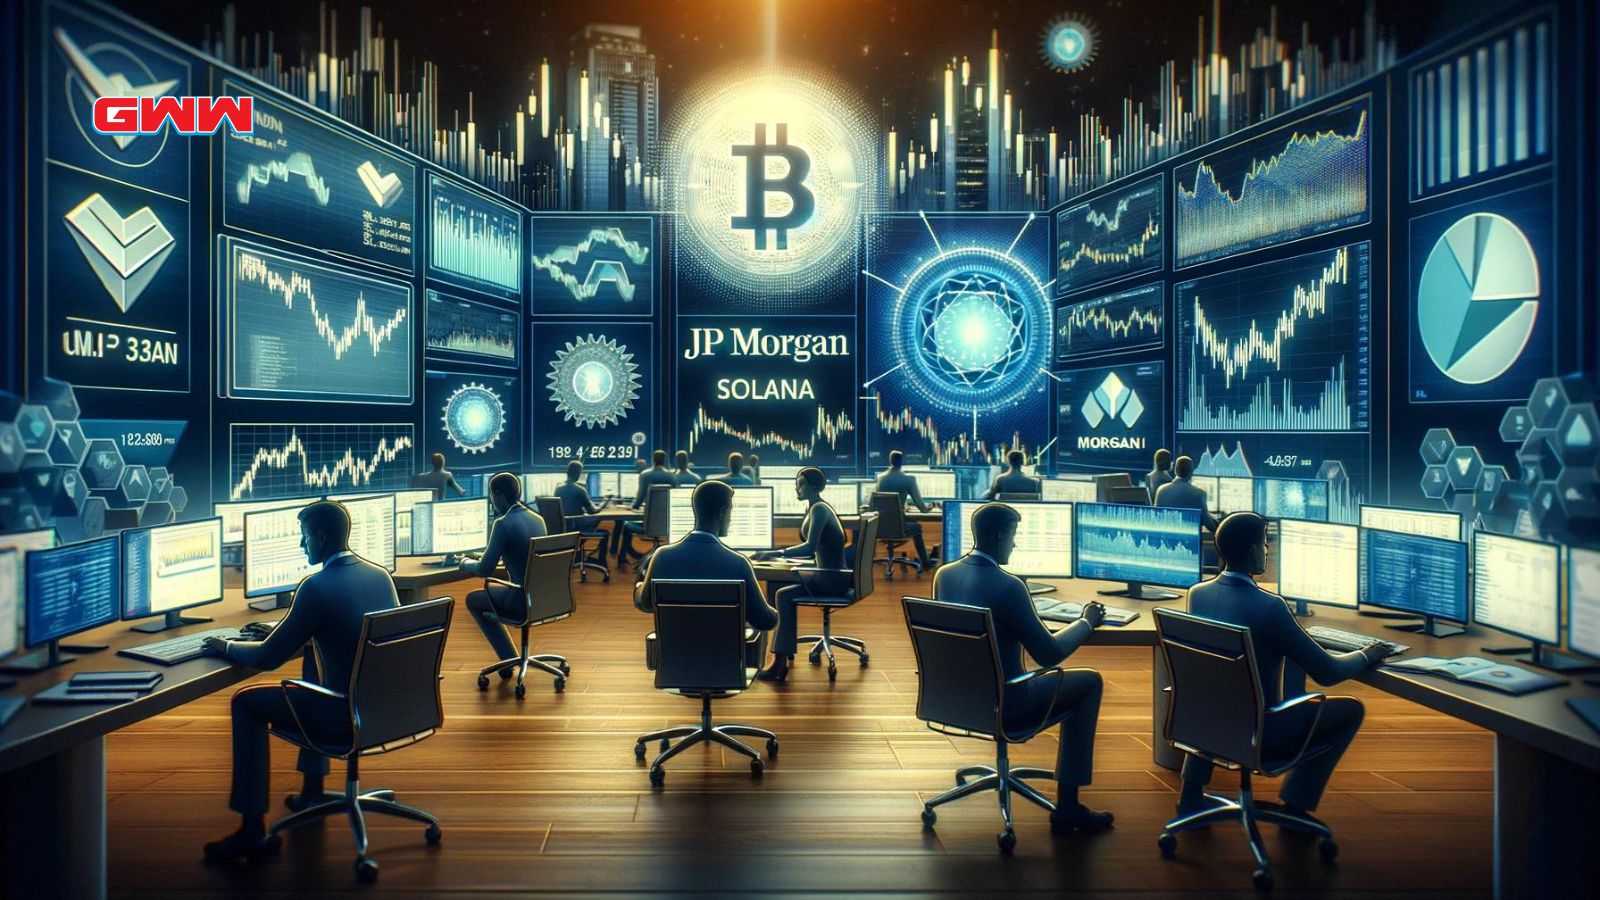 A financial scene depicting JP Morgan's skepticism about the approval of Solana and other crypto ETFs